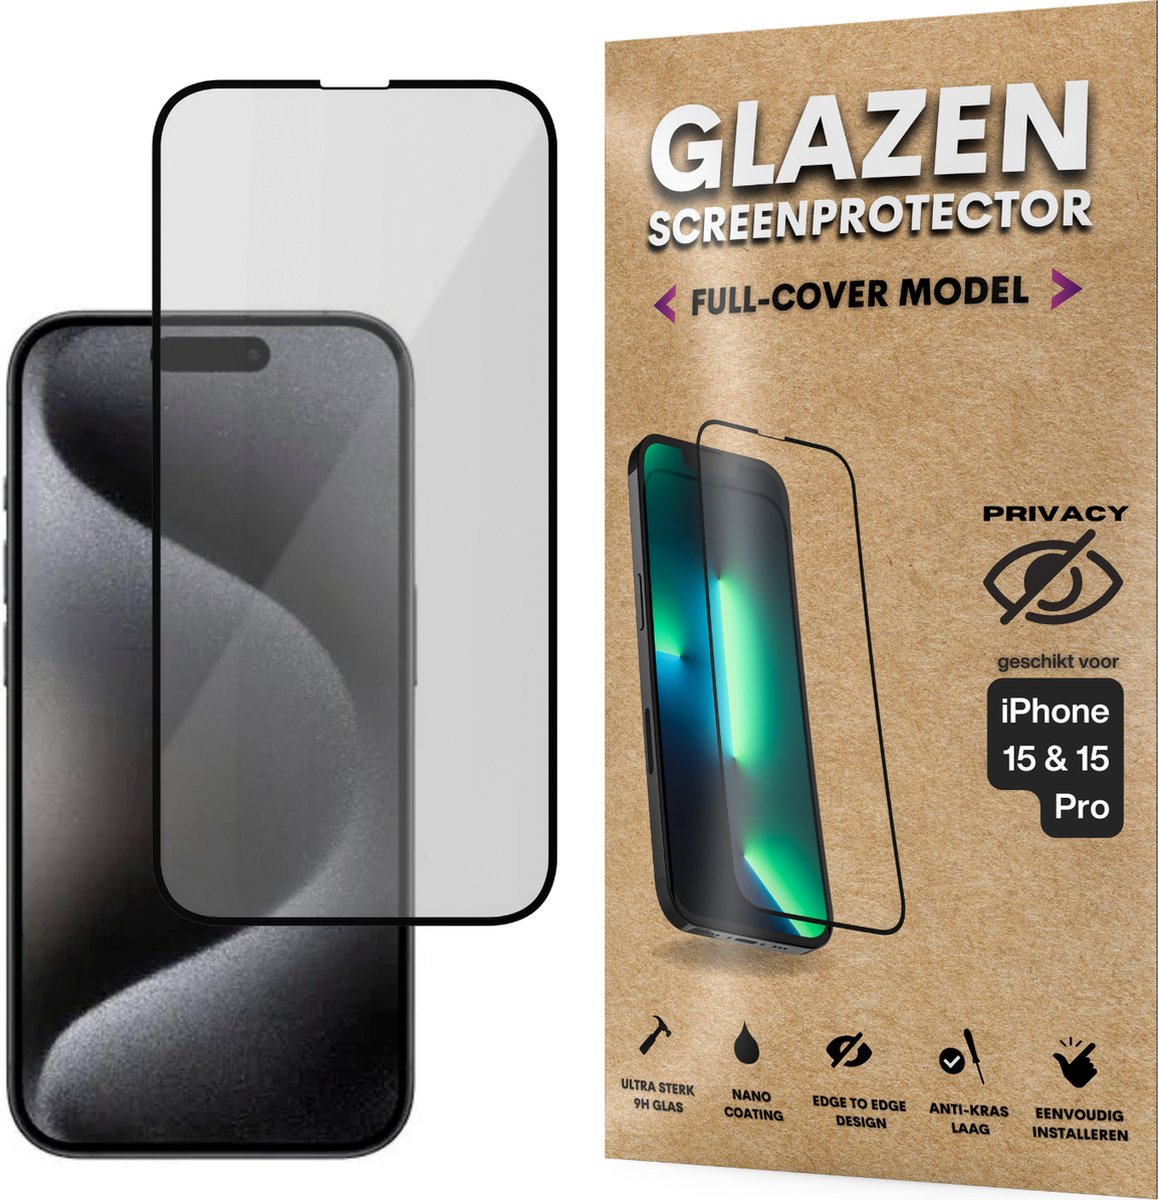 Privacy Screenprotector - Geschikt voor iPhone 15 / 15 Pro - Gehard Glas - Full Cover Tempered Privacy Glass - Case Friendly